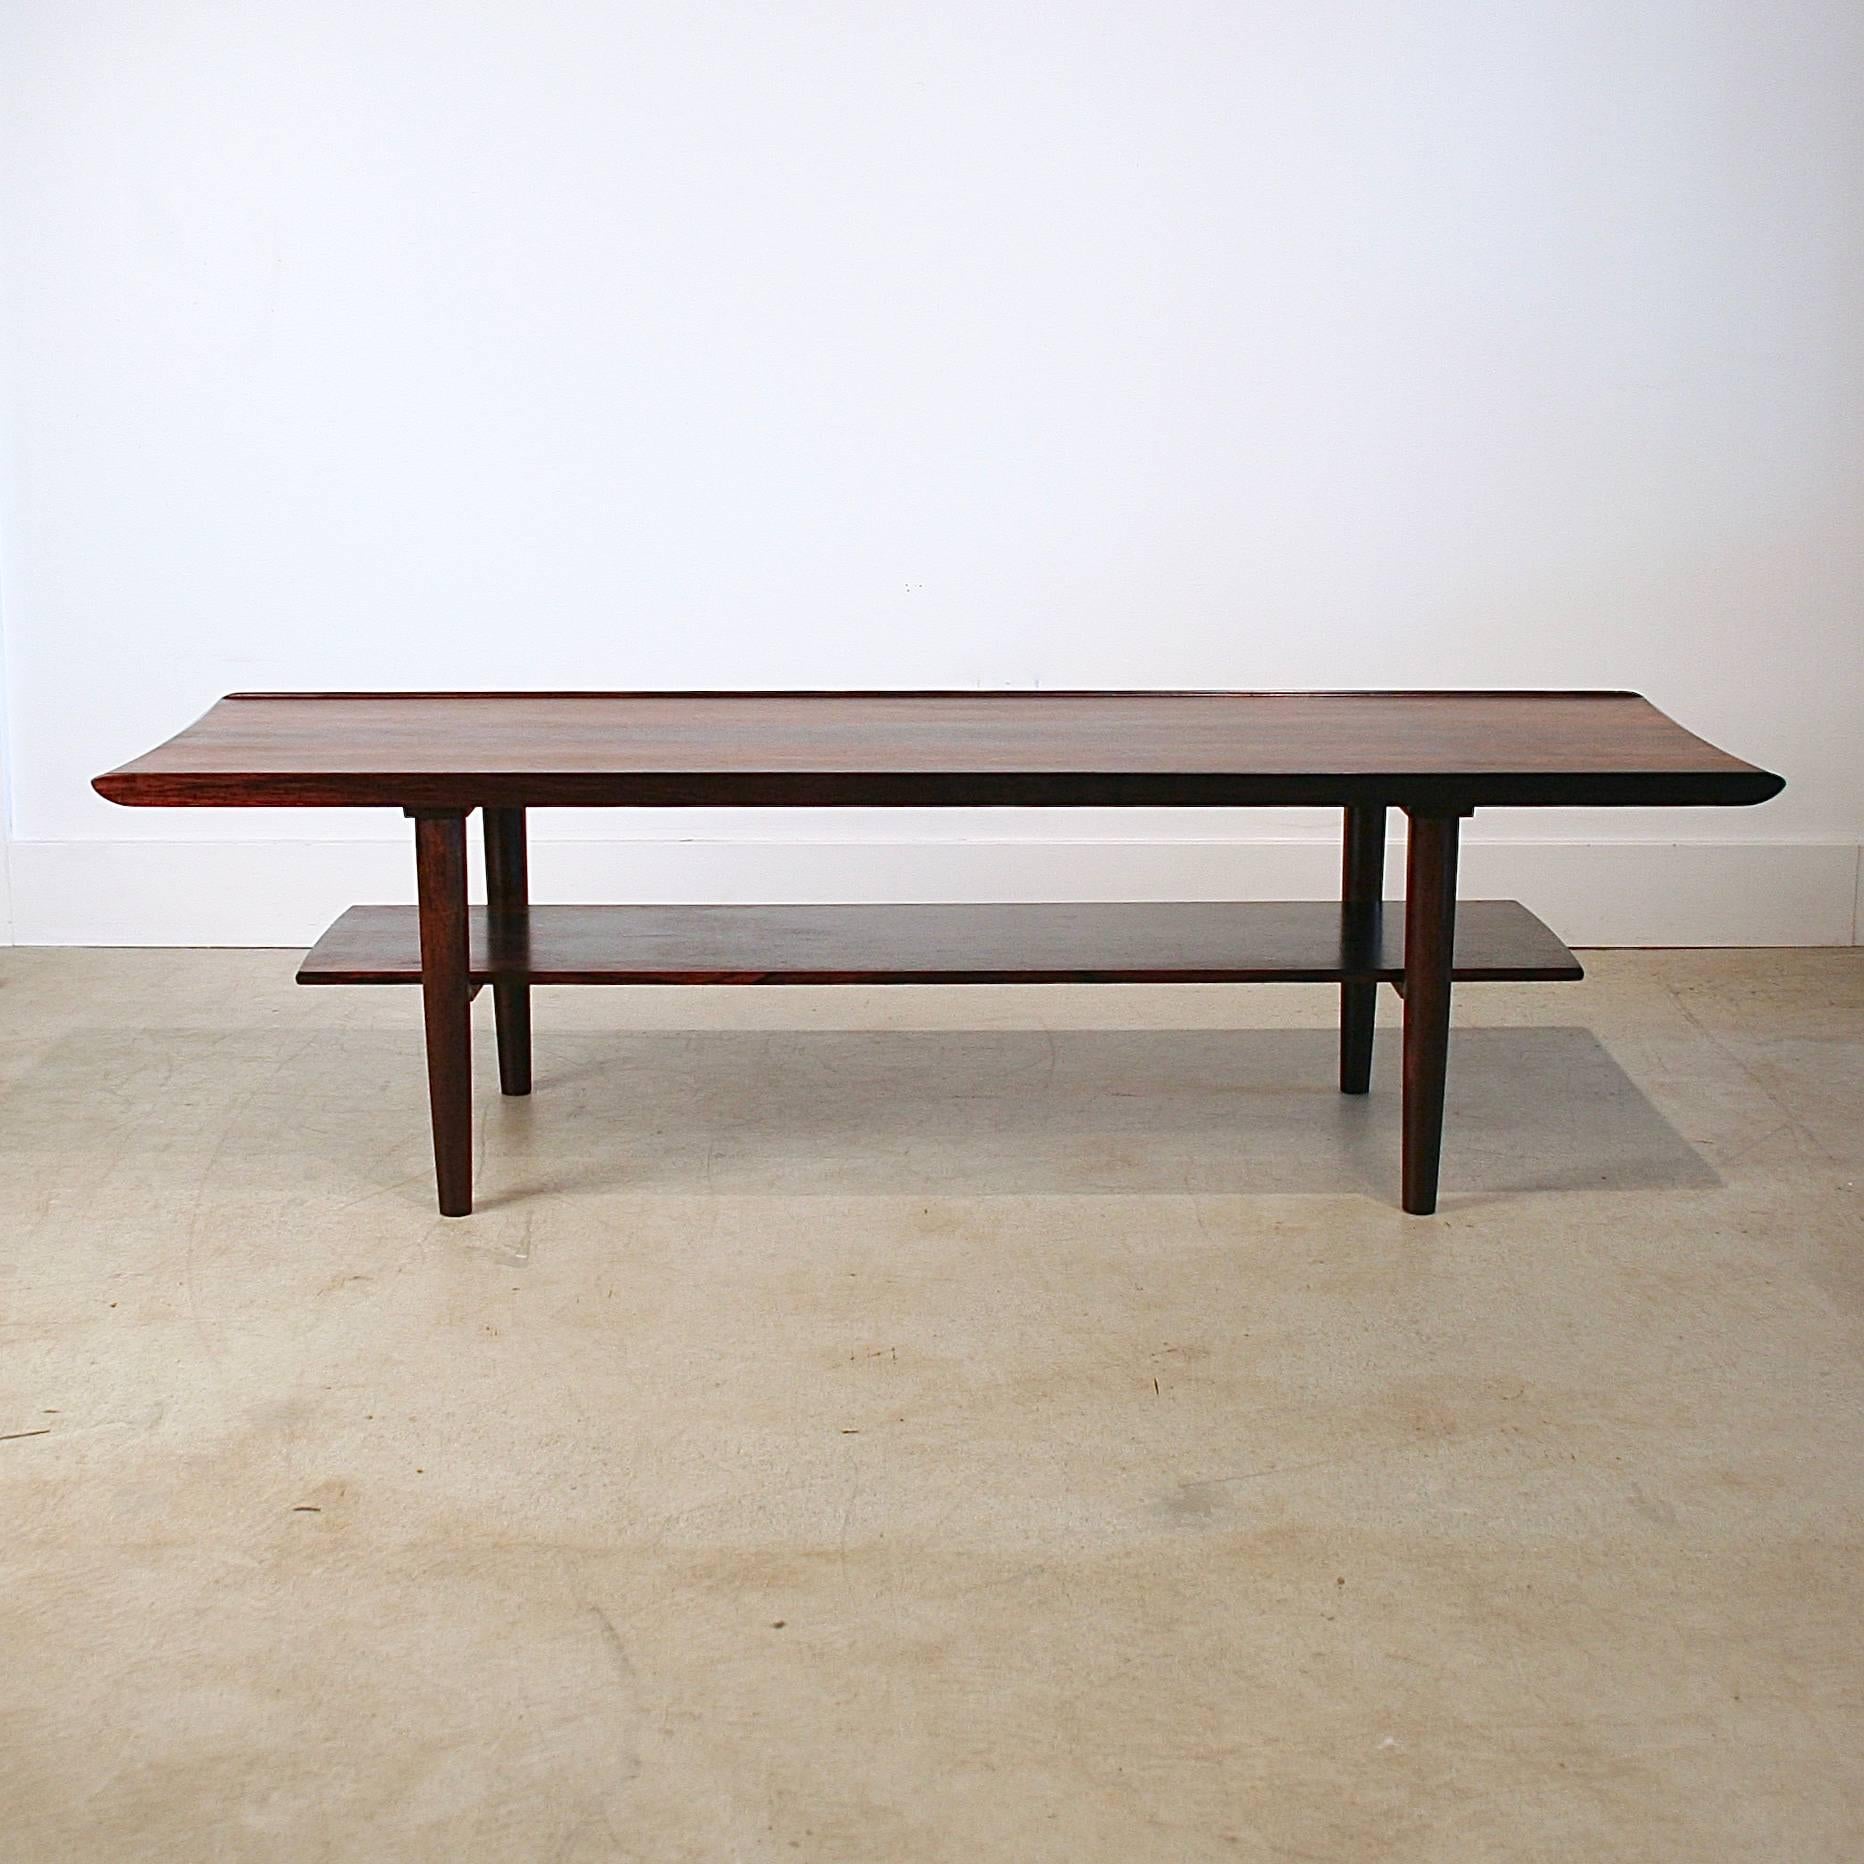 Exquisite vintage Danish rosewood coffee table with shelf. Features raised lip edge on tabletop and absolutely stunning rosewood graining throughout. Made in Denmark.